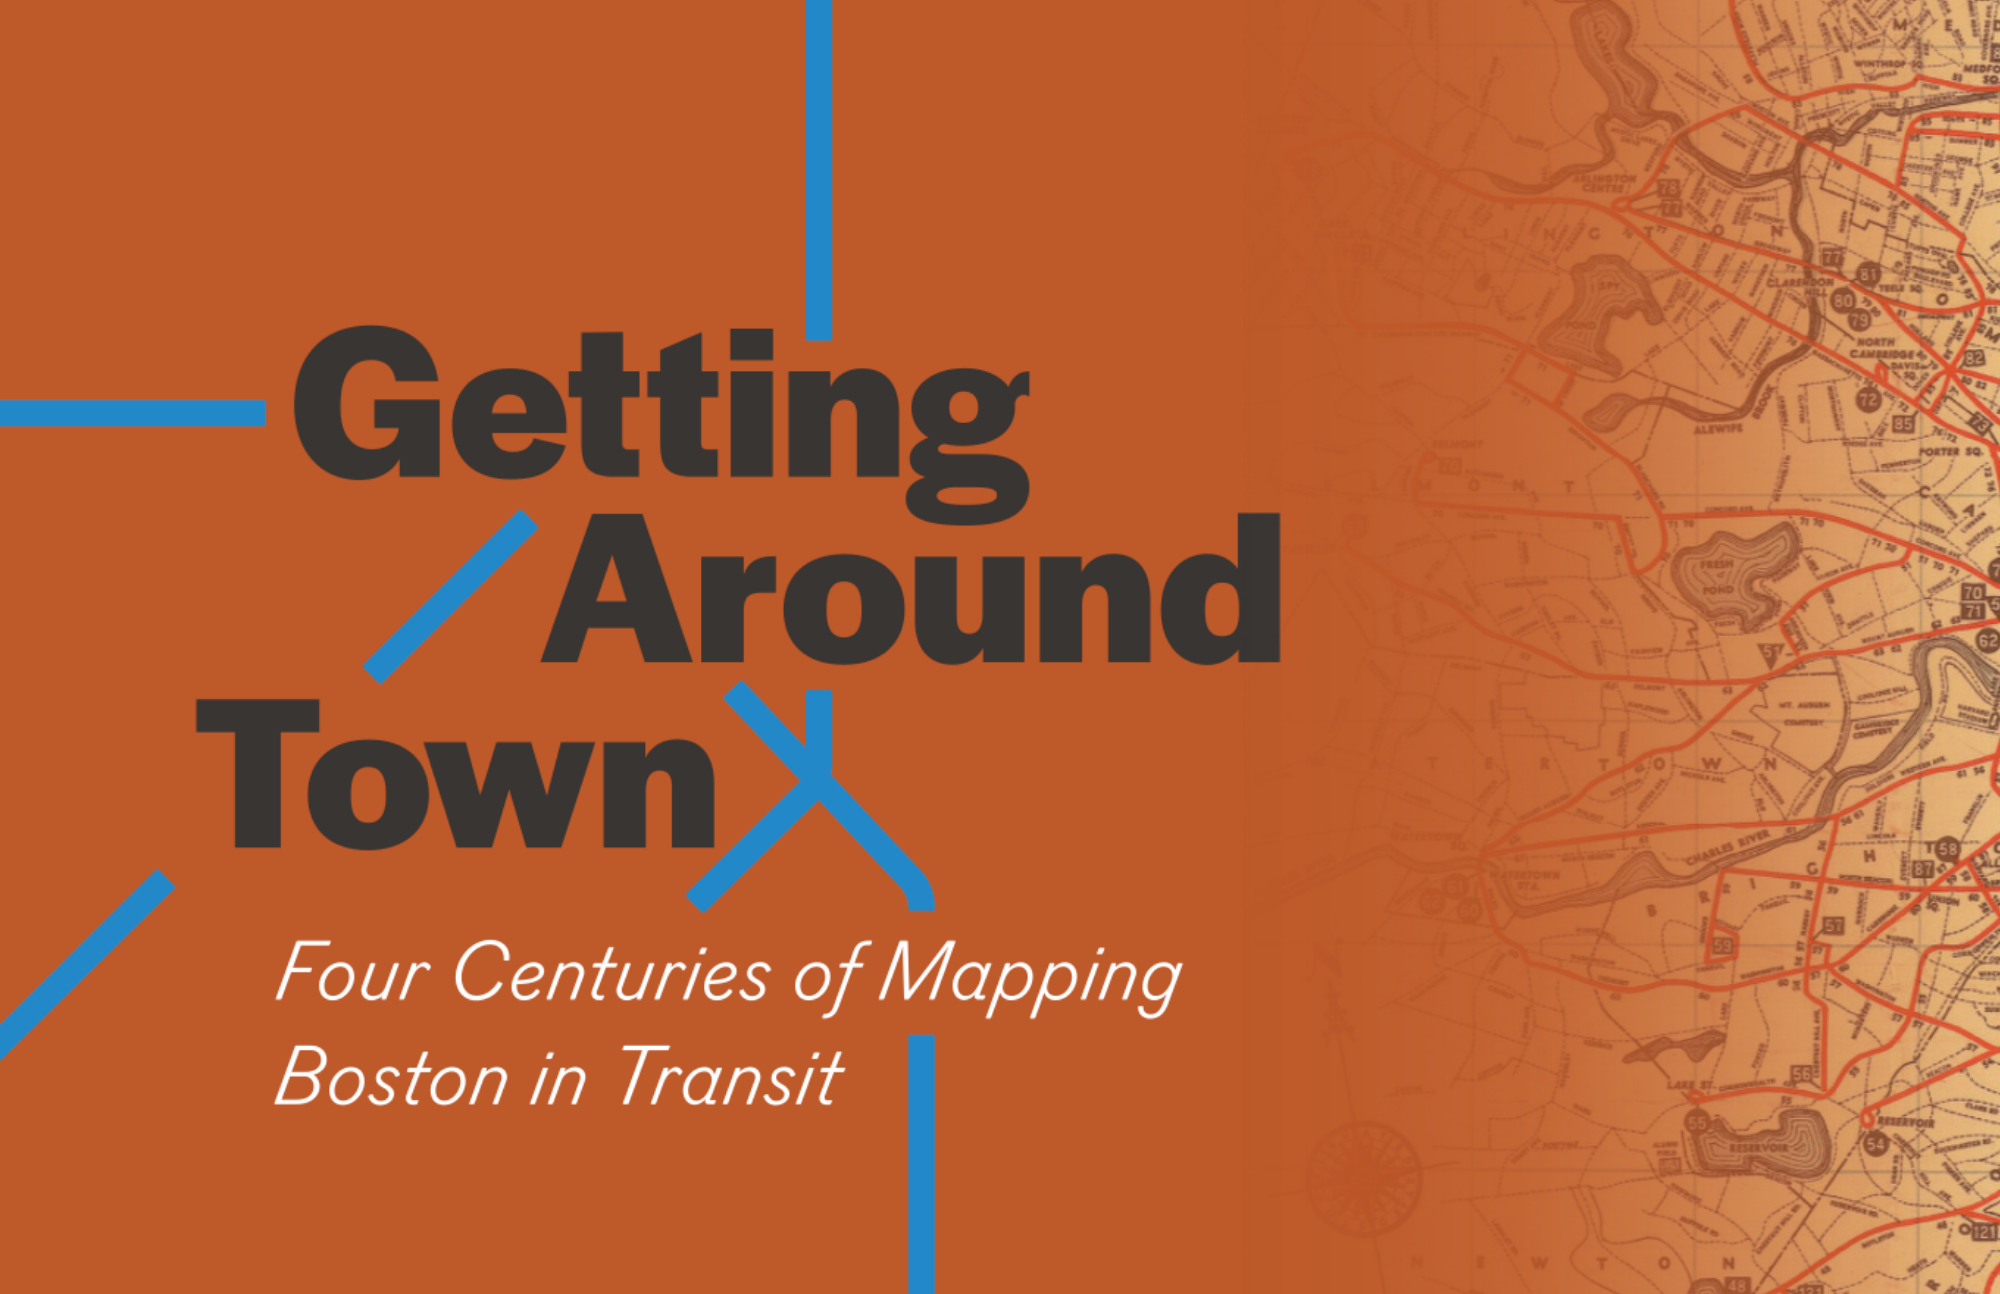 Curatorial Introduction to Getting Around Town: Four Centuries of Mapping Boston in Transit